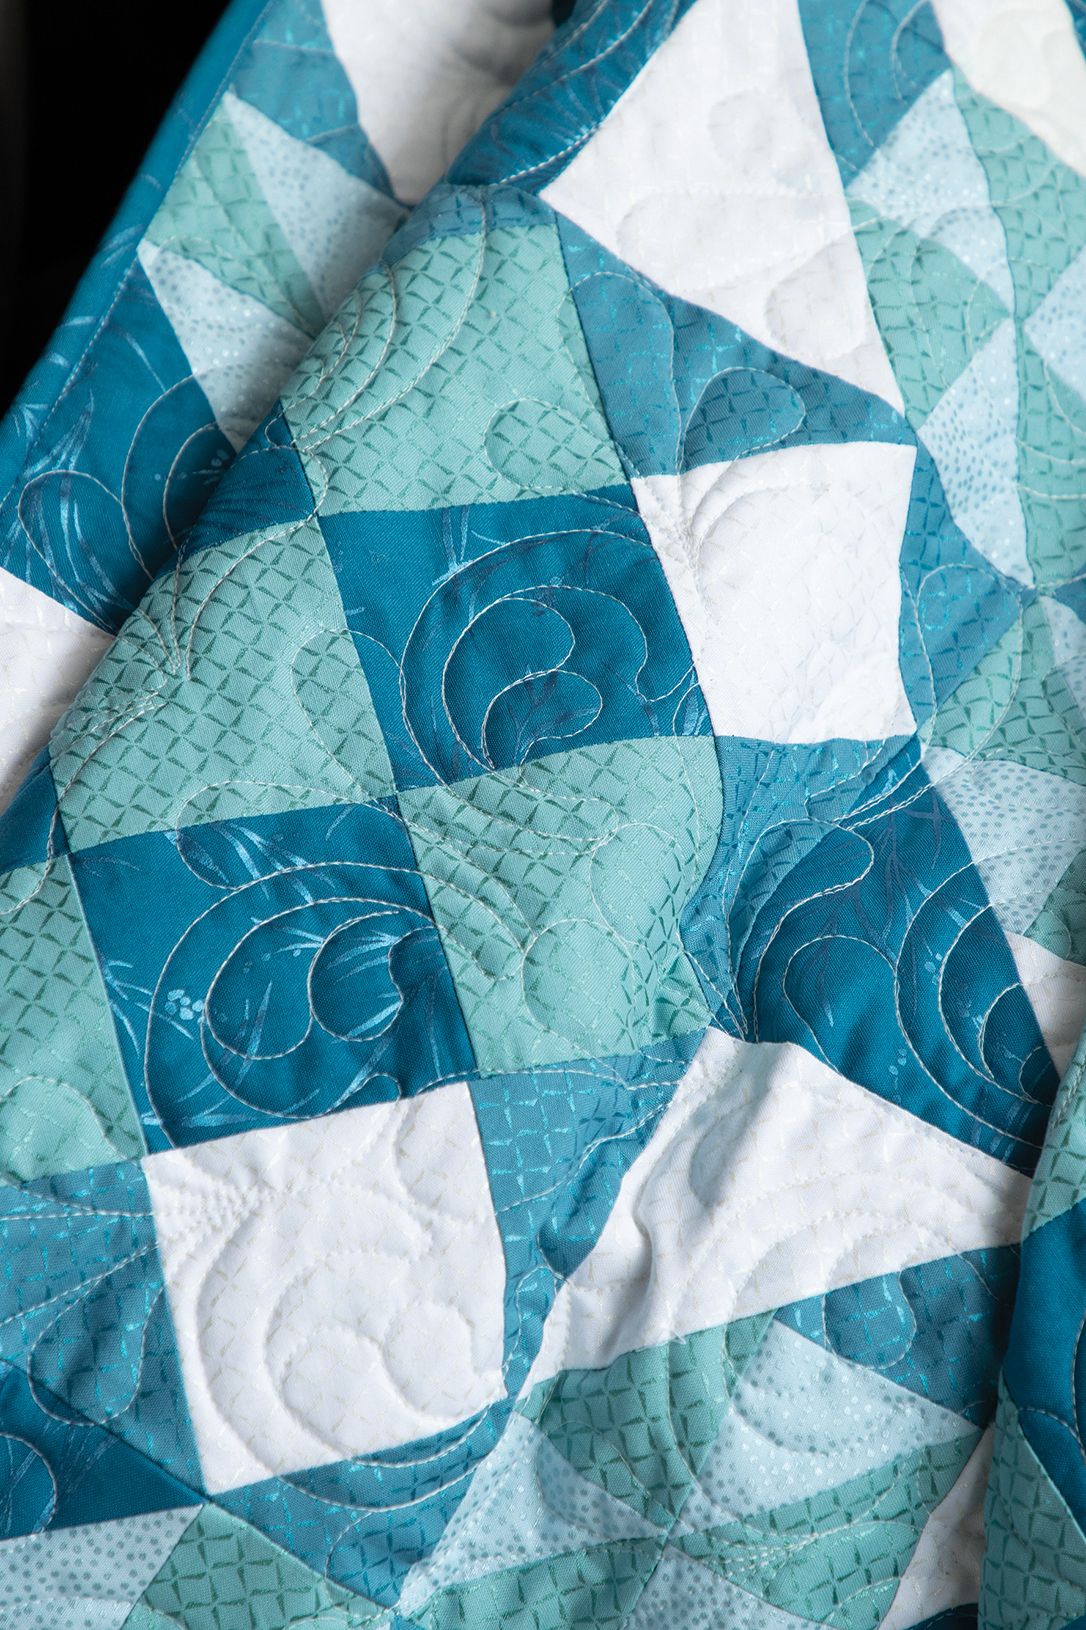 Winter Fraulein quilt in Liberty Cottons - Diary of a Quilter